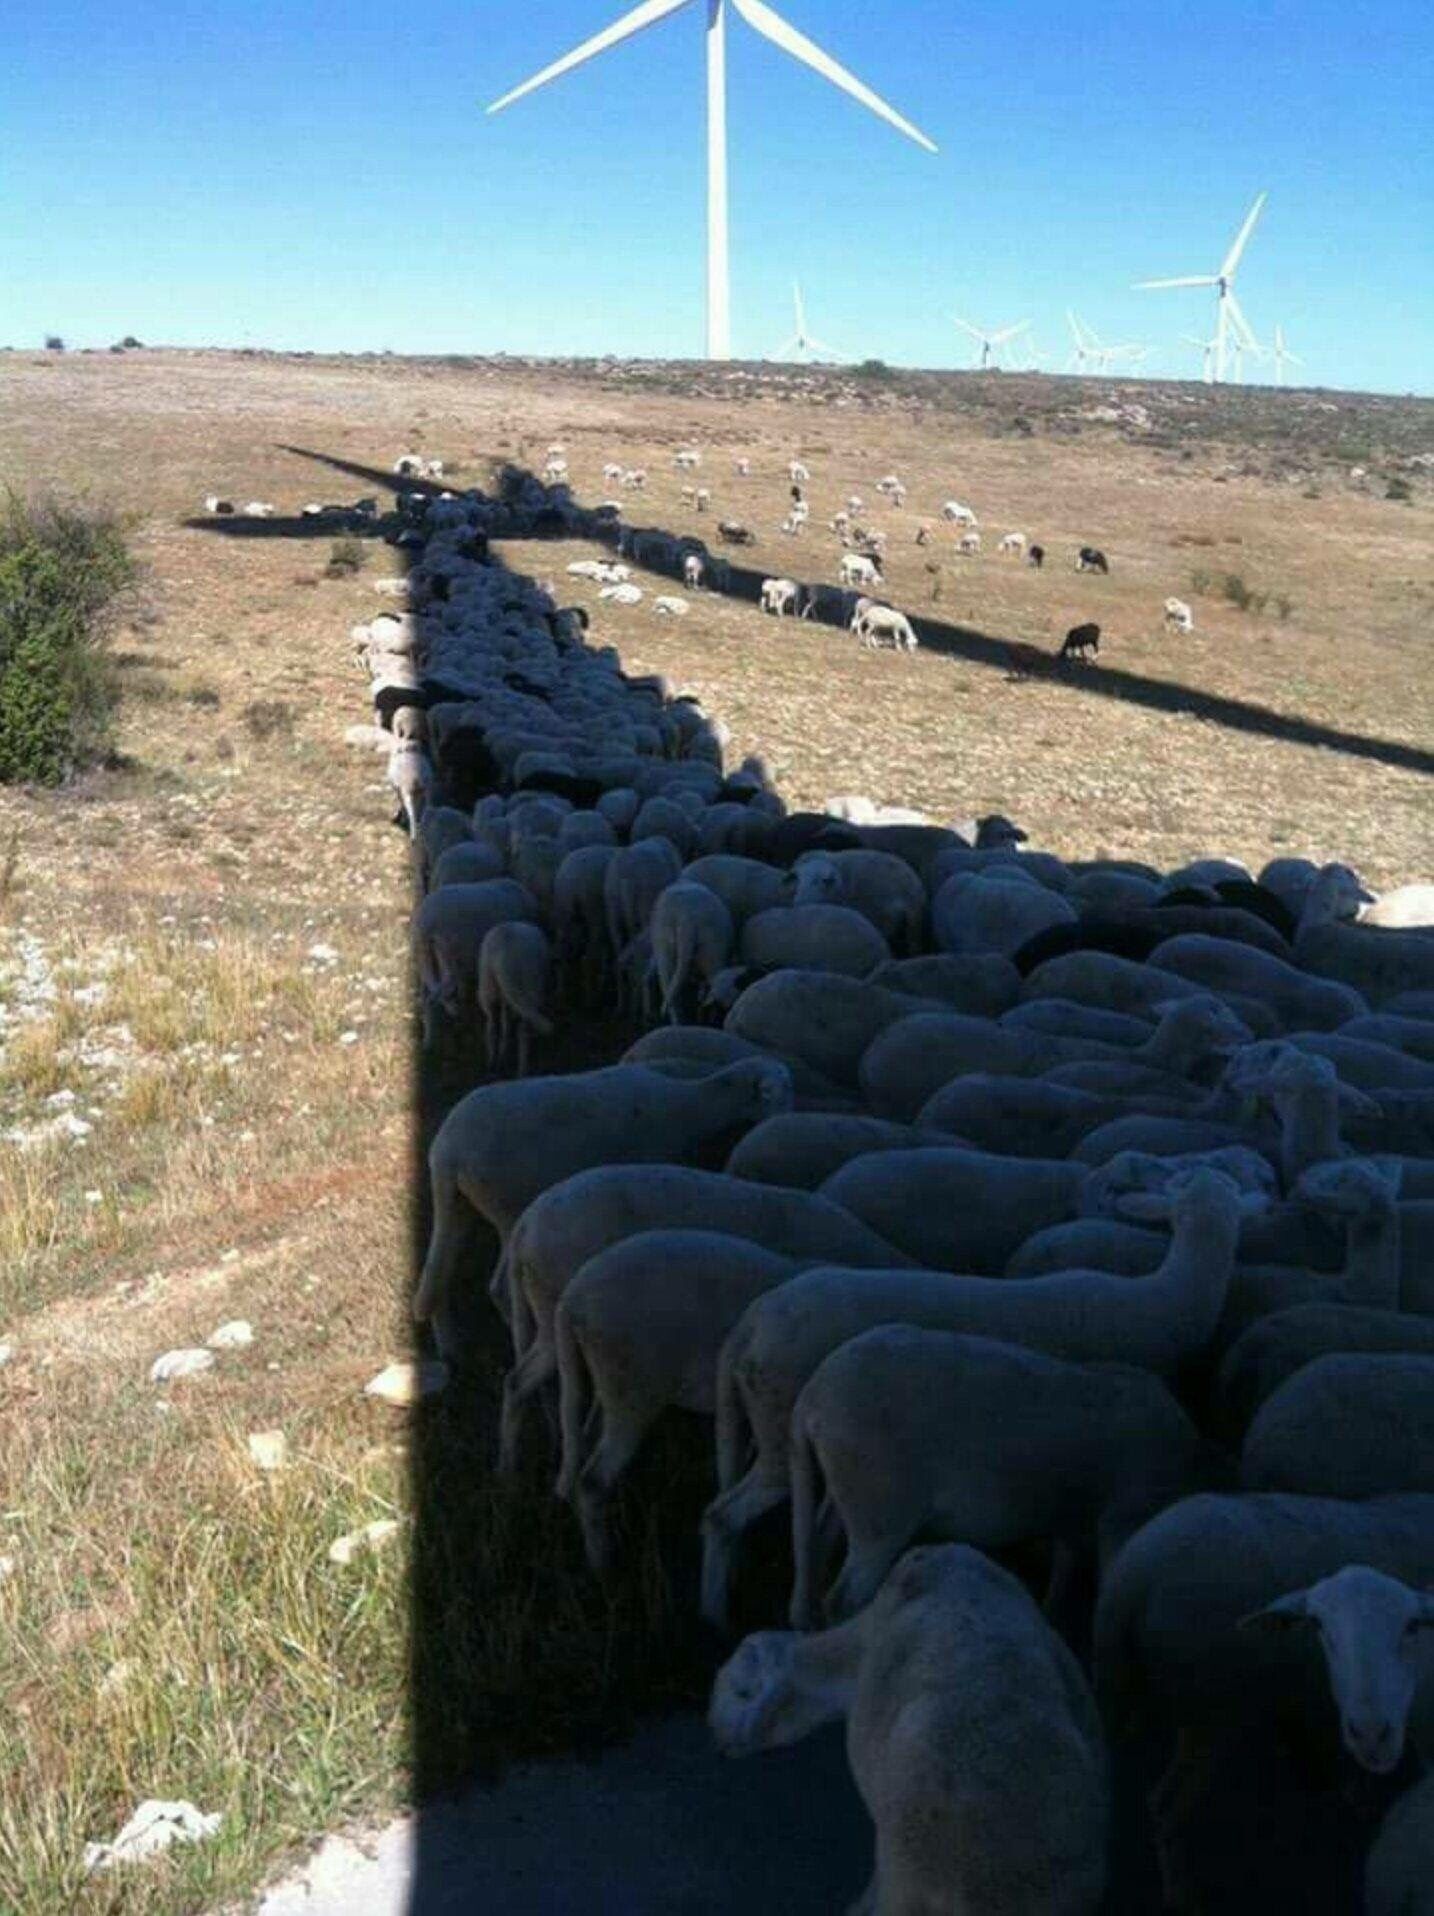 And they say wind turbines are bad for local wildlife